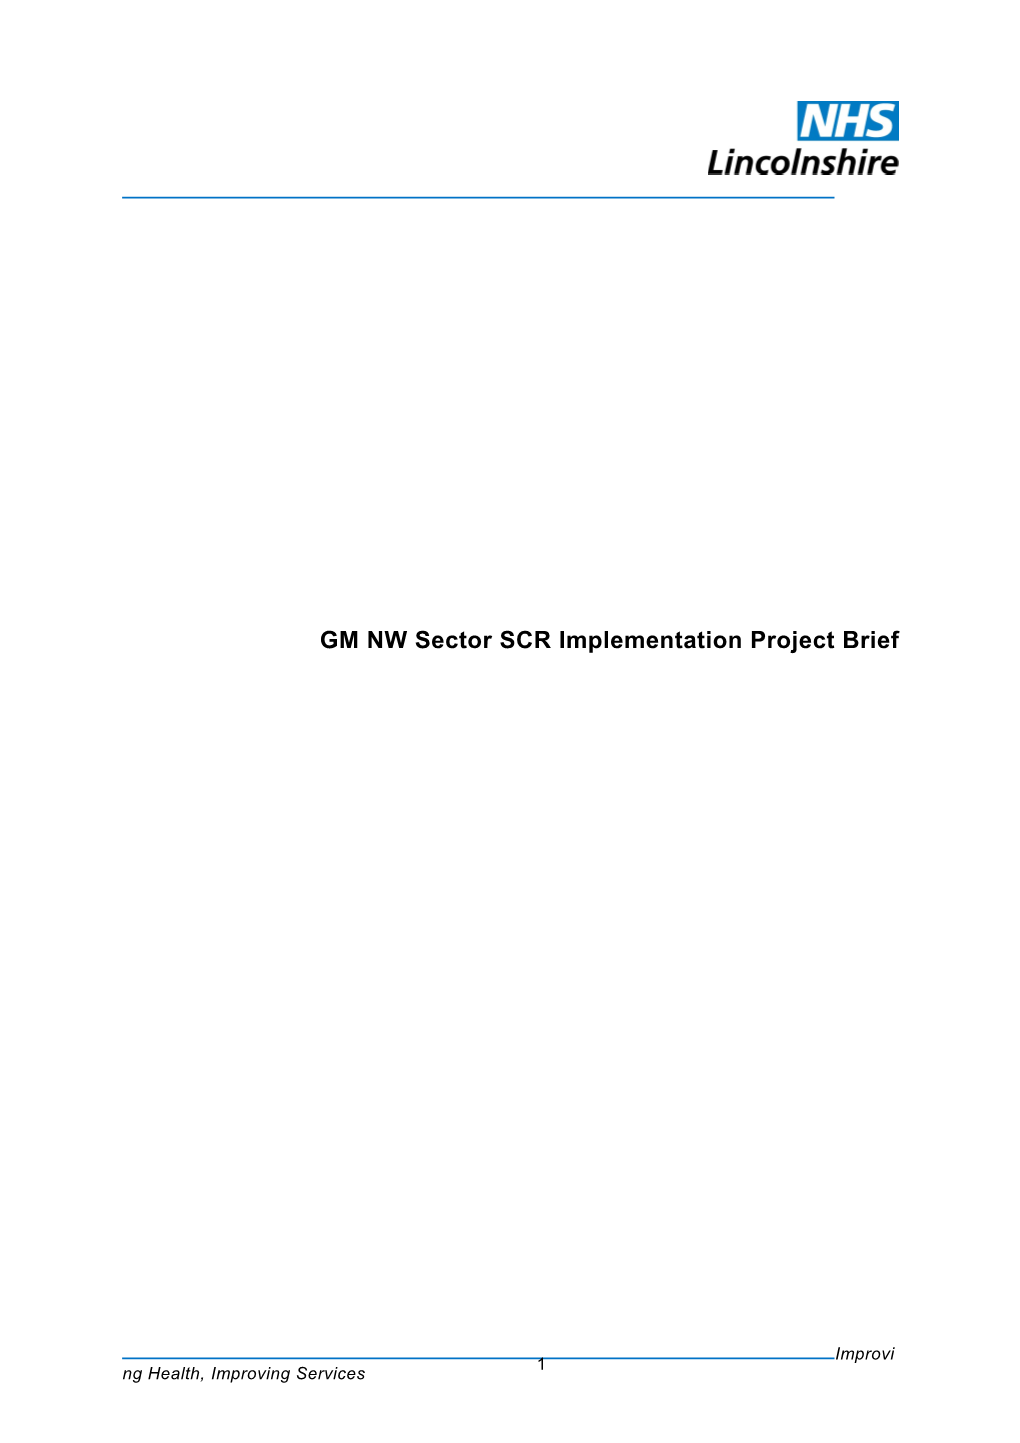 GM NW Sector SCR Implementation Project Brief